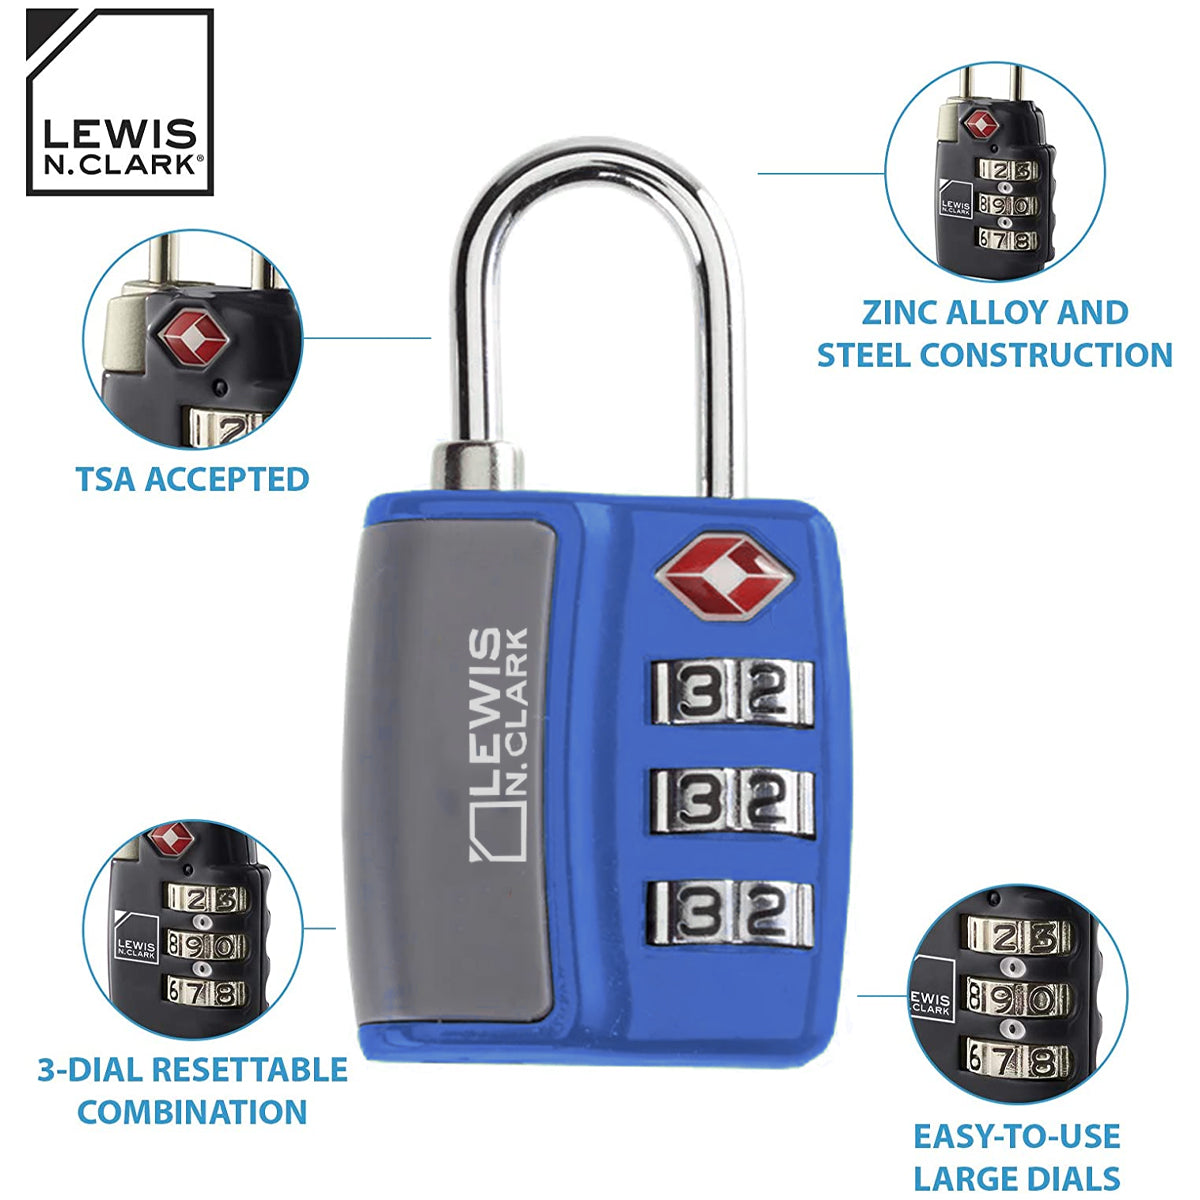 Lewis N. Clark Travel Sentry 3-Dial Combination Lock - TSA Approved